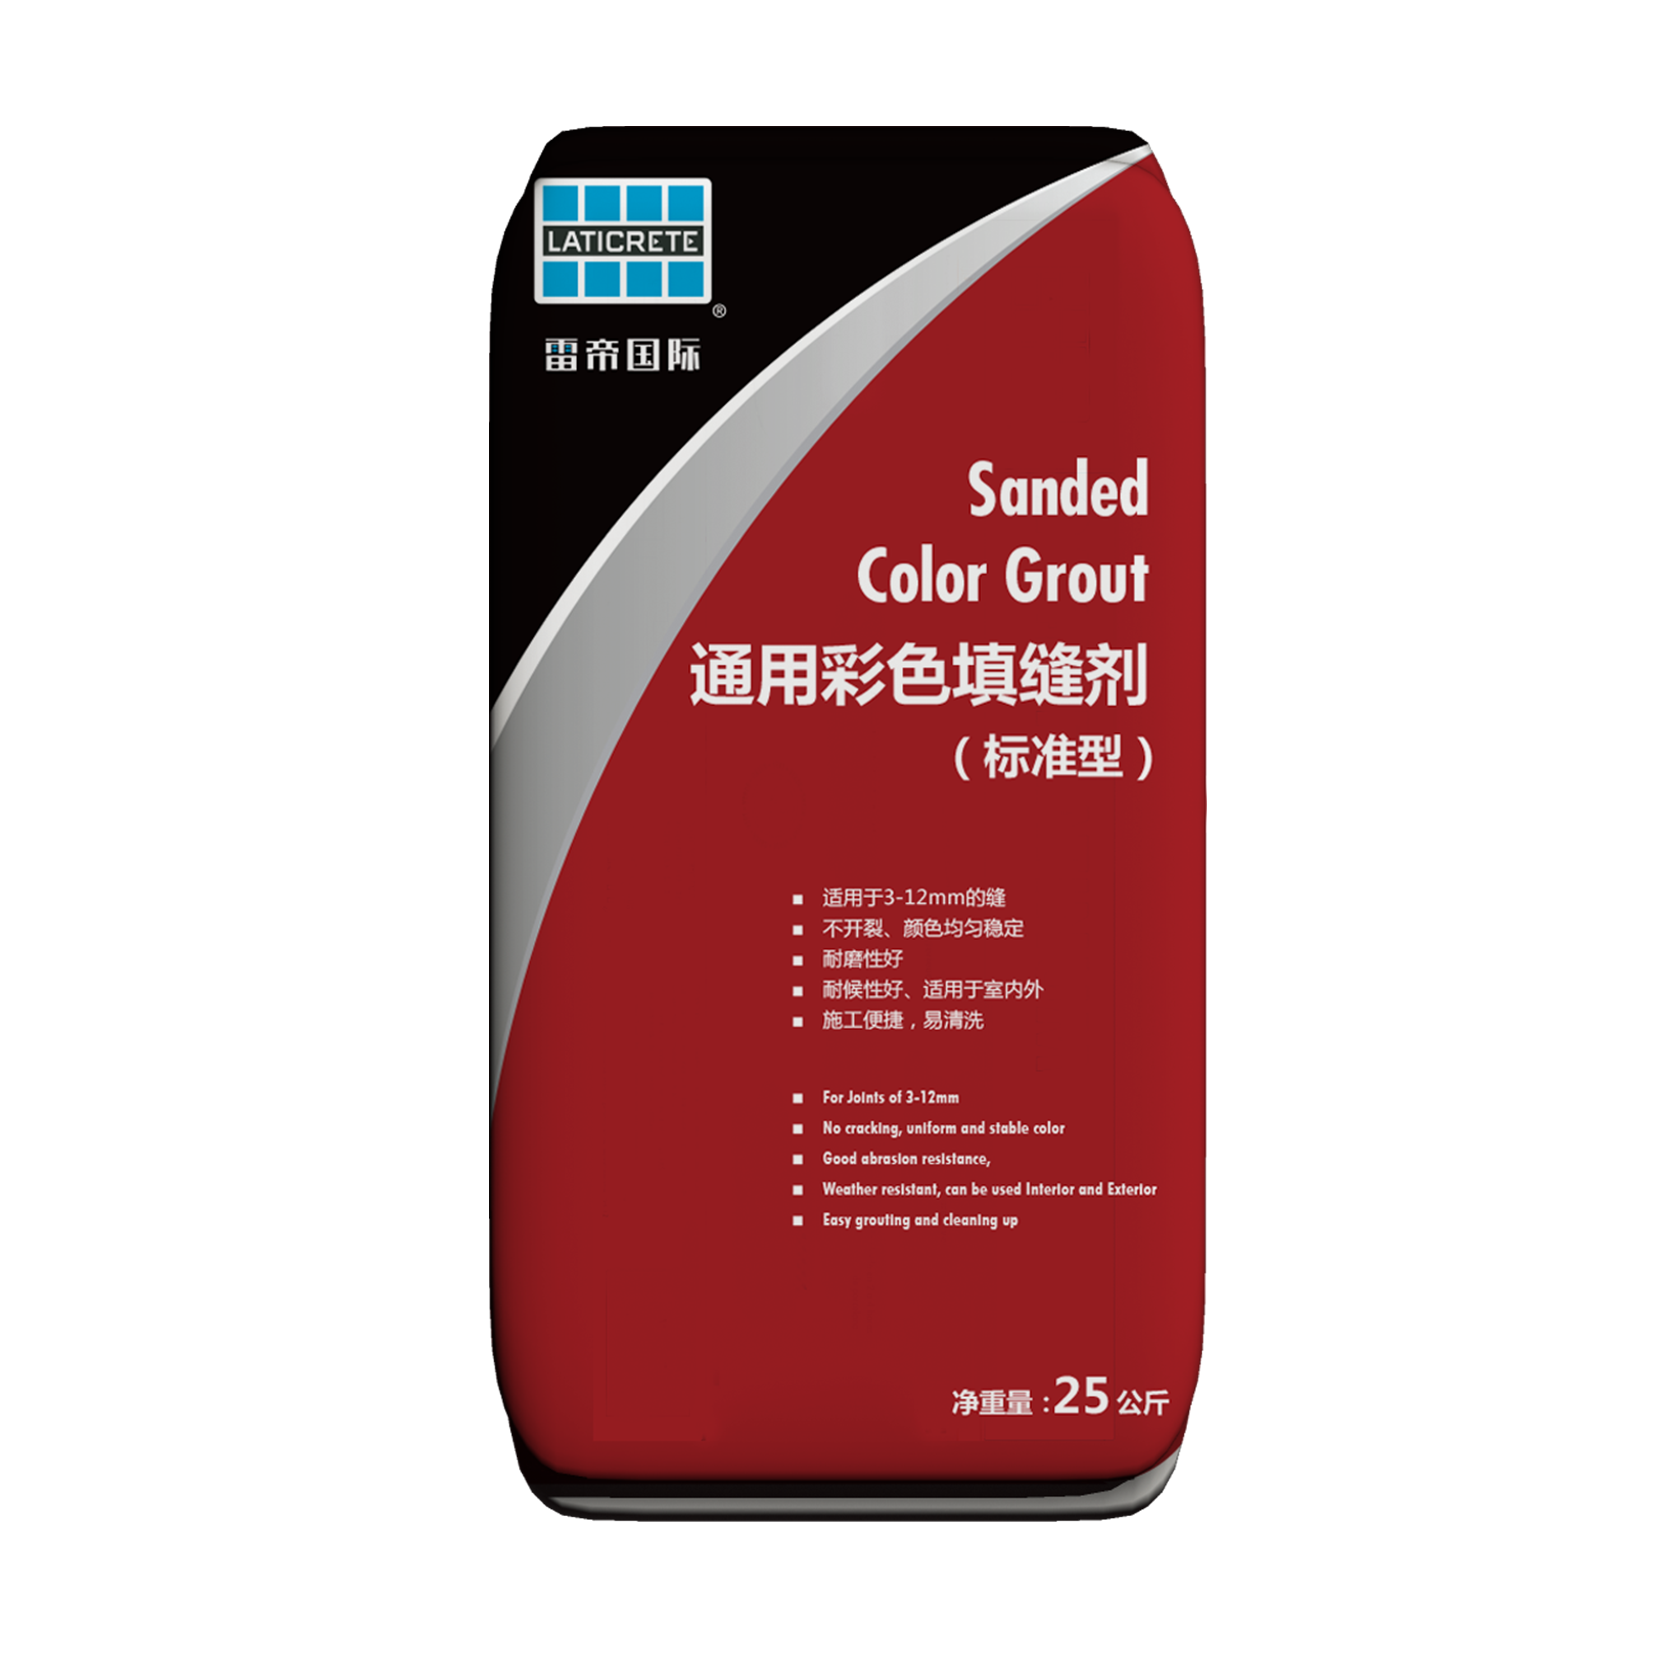 Sanded color grout